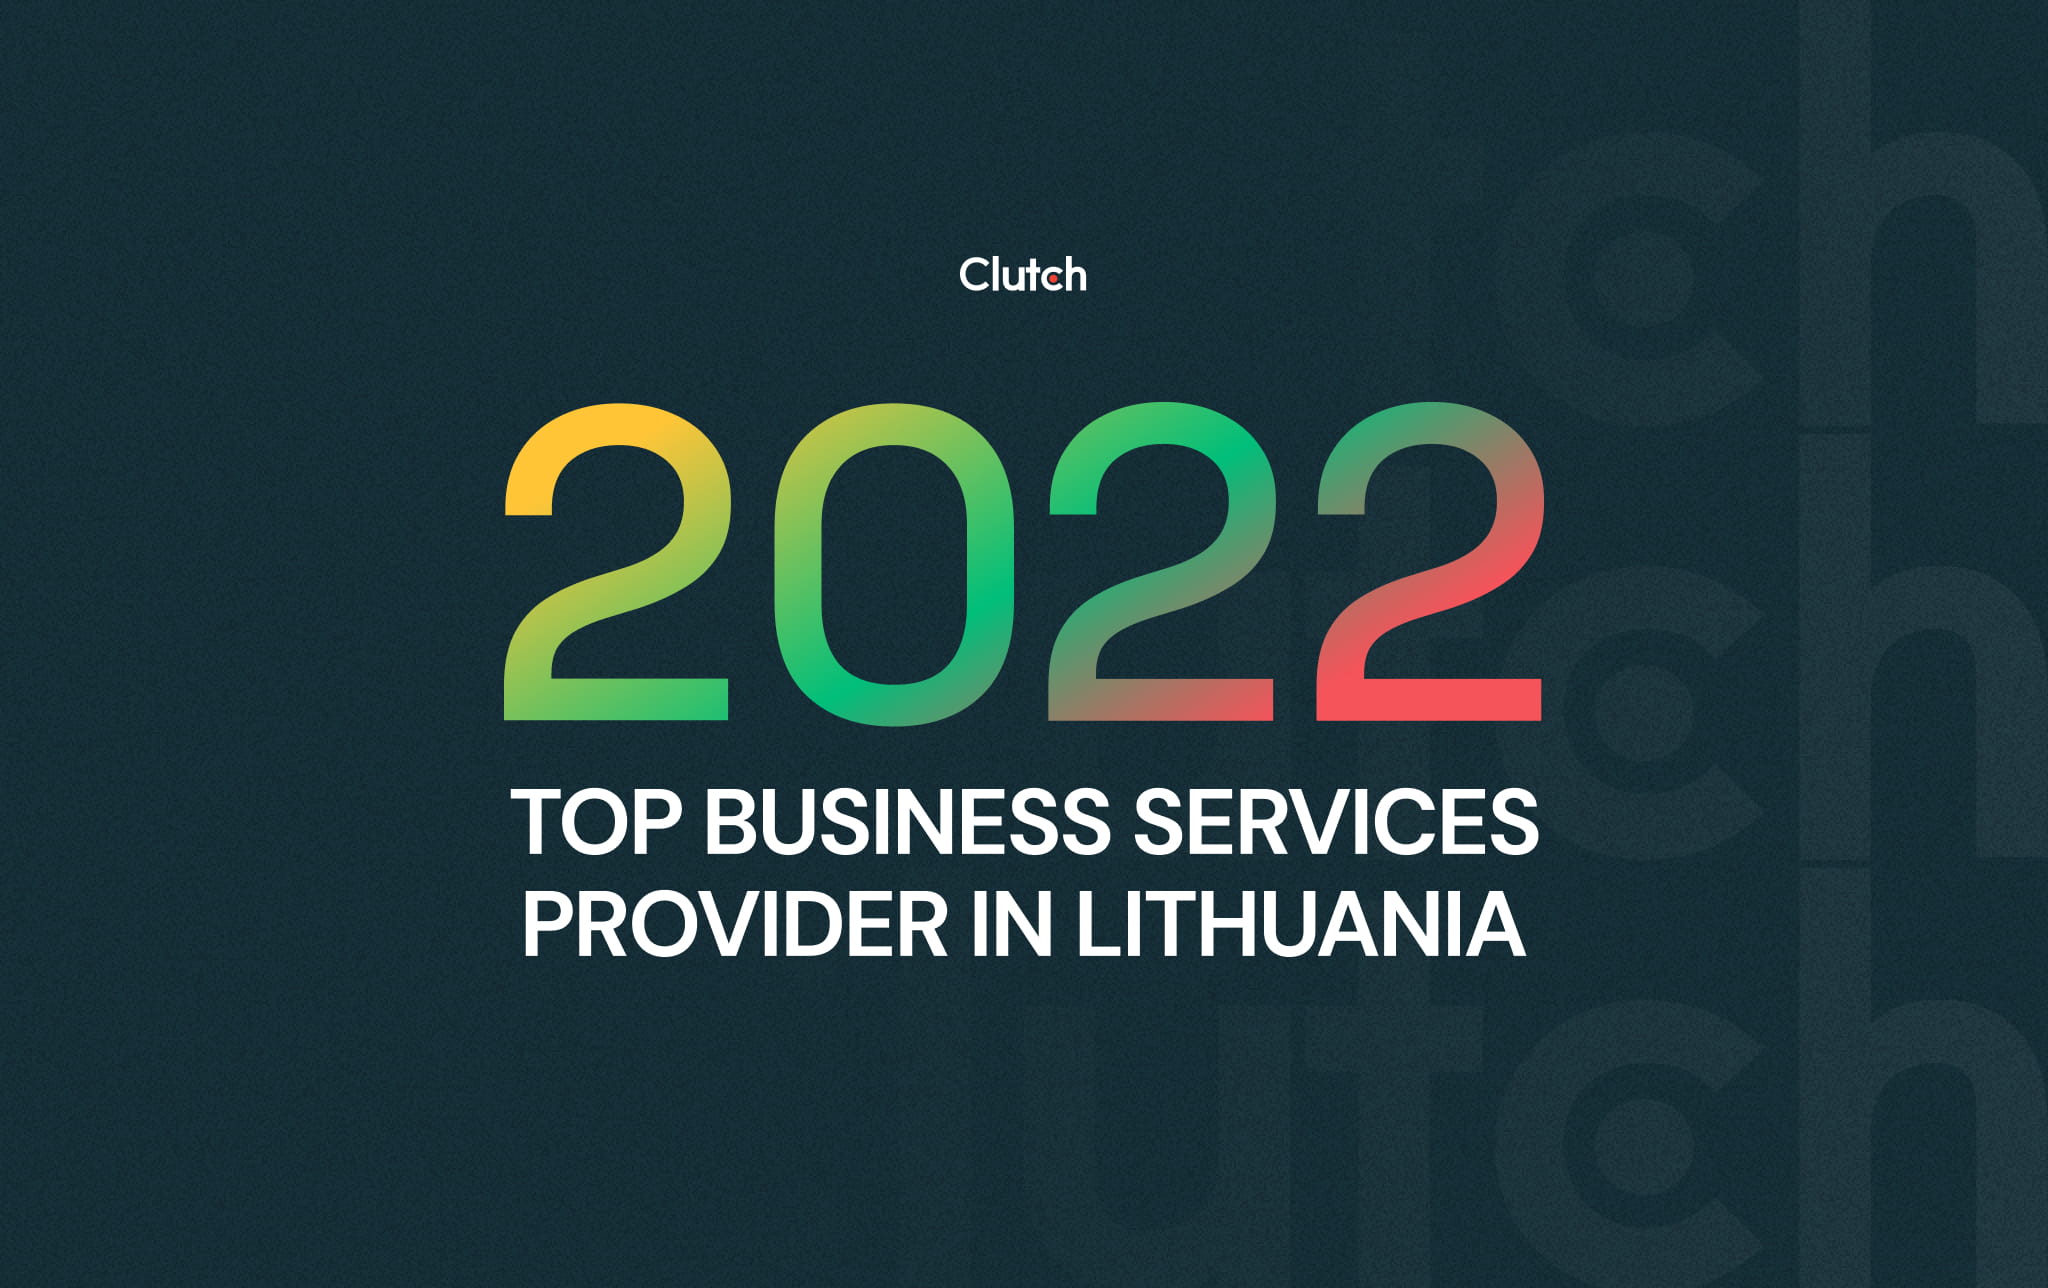 SpurIT hailed as a 2022 TOP business services provider in Lithuania